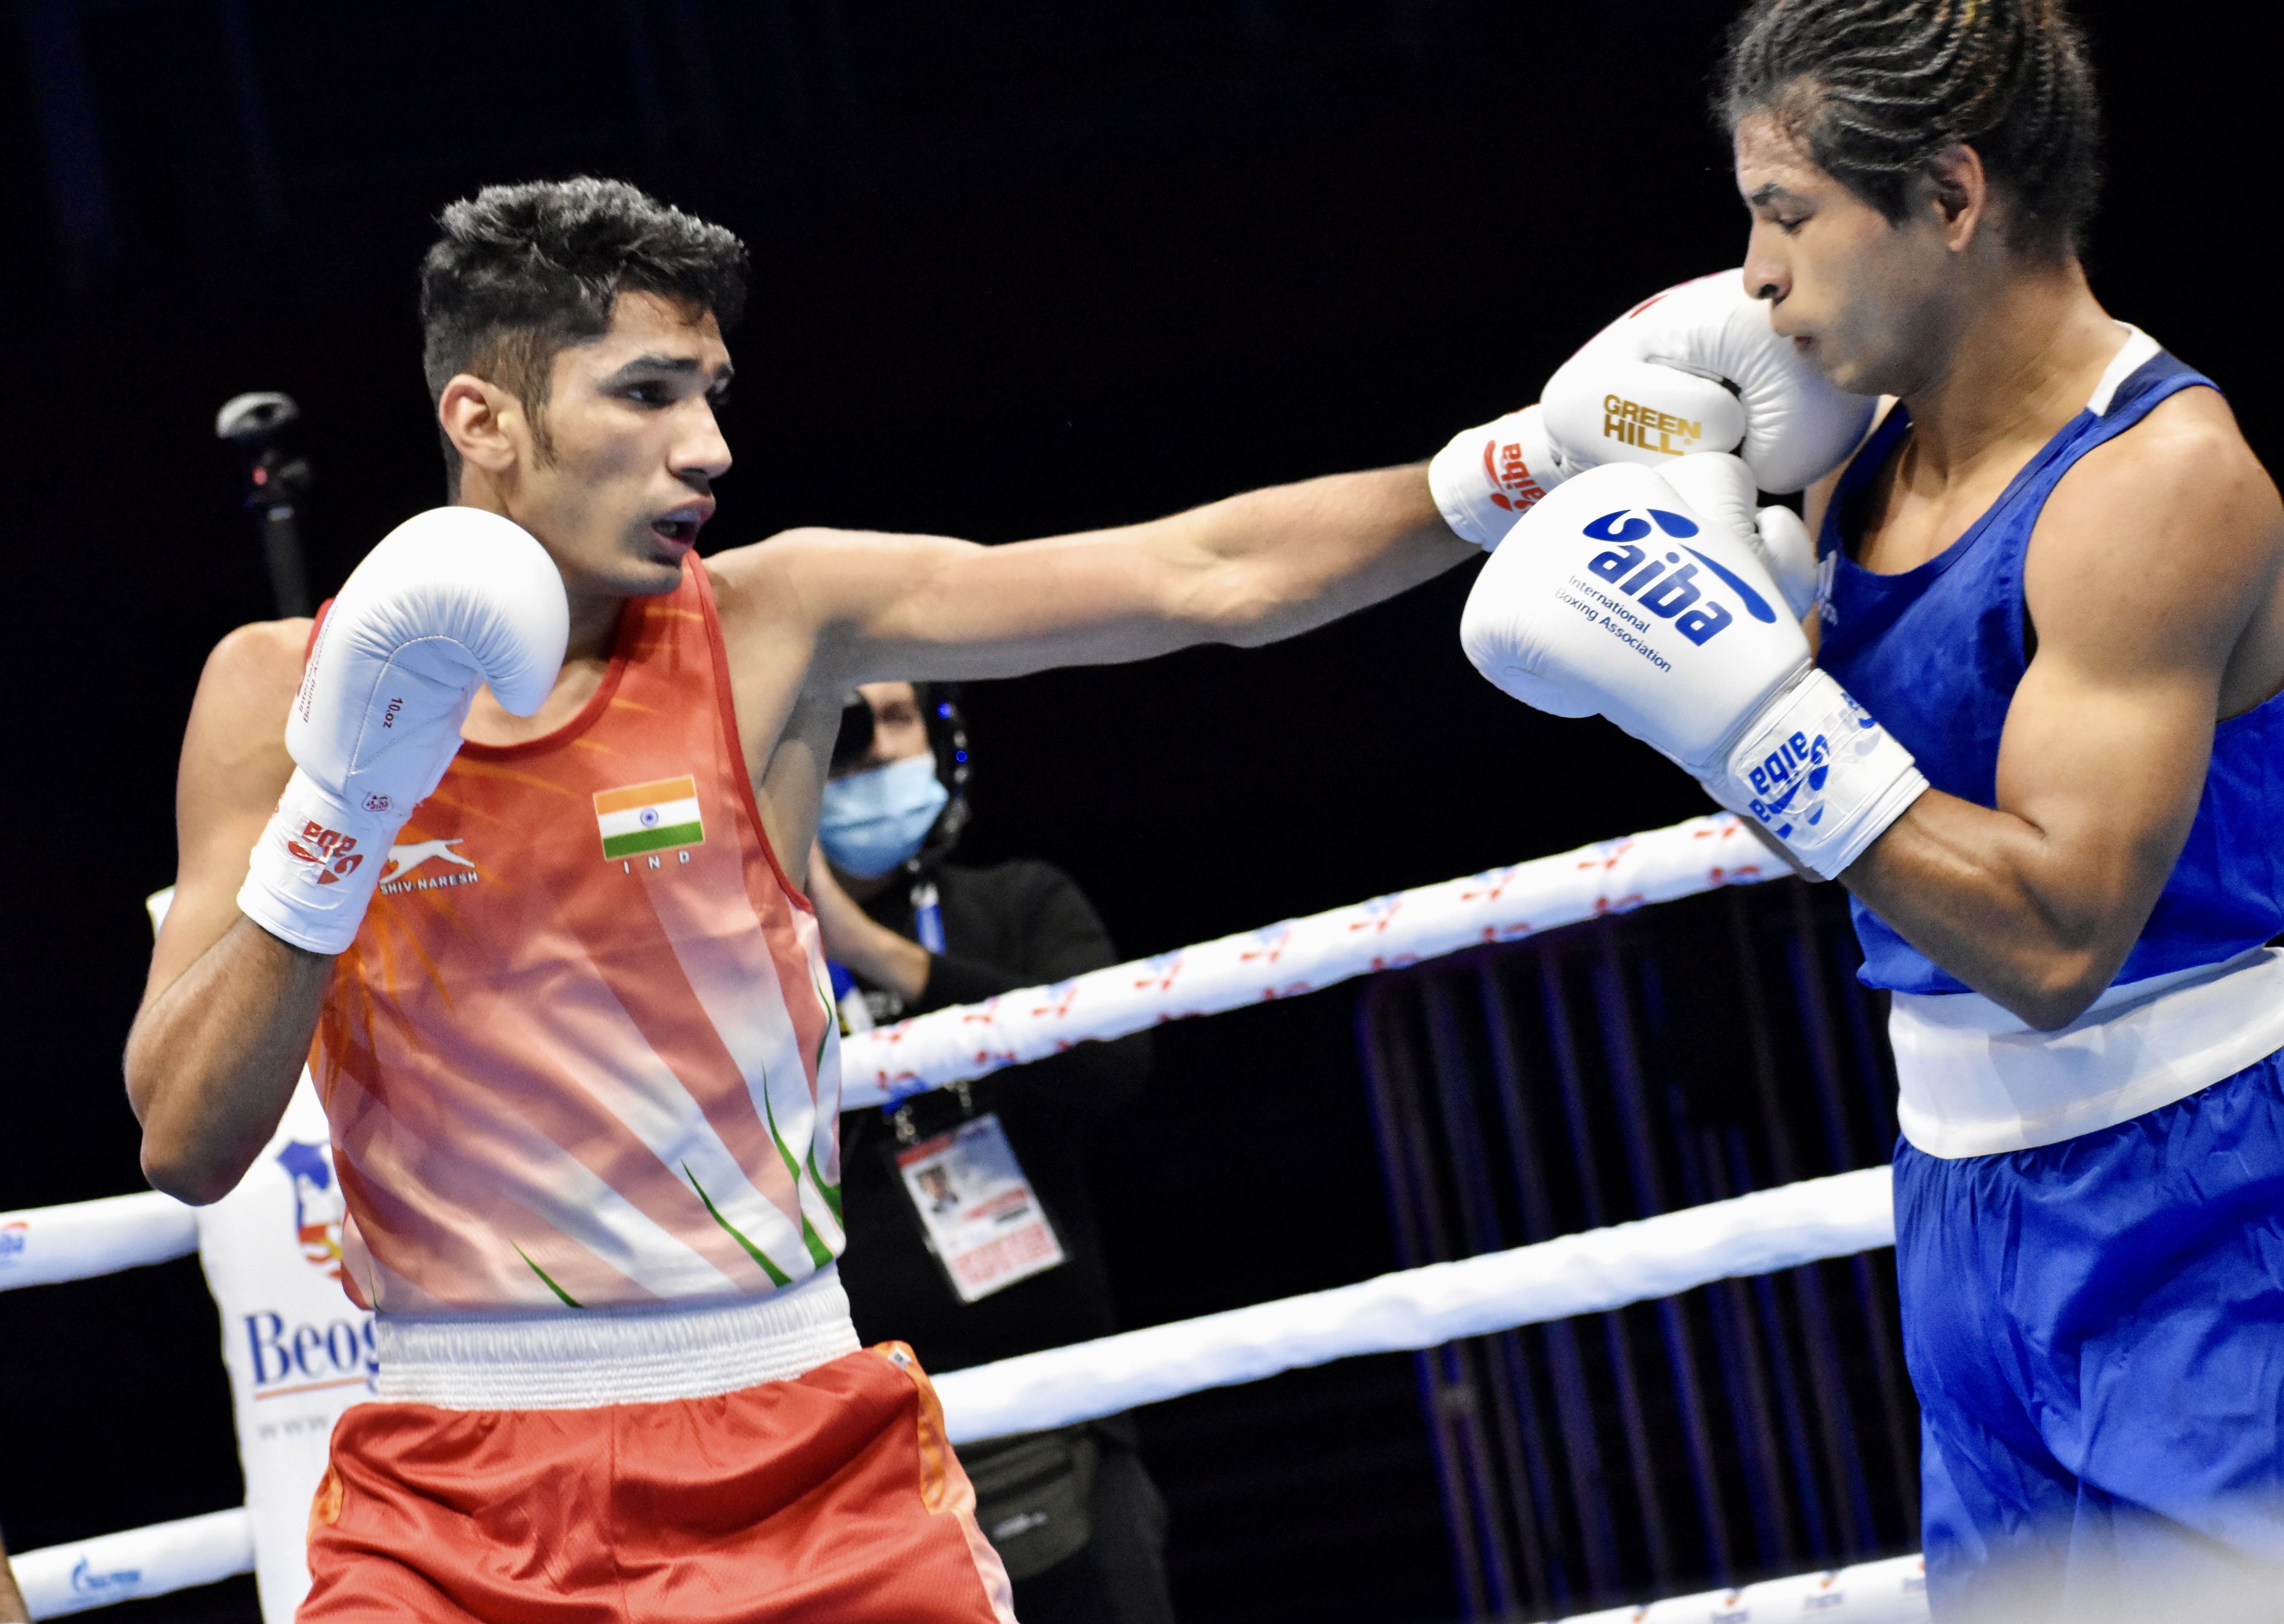 2021 Men’s World Boxing Championships | Rohit Mor and Akash Sangwan kick-start India's campaign on a high